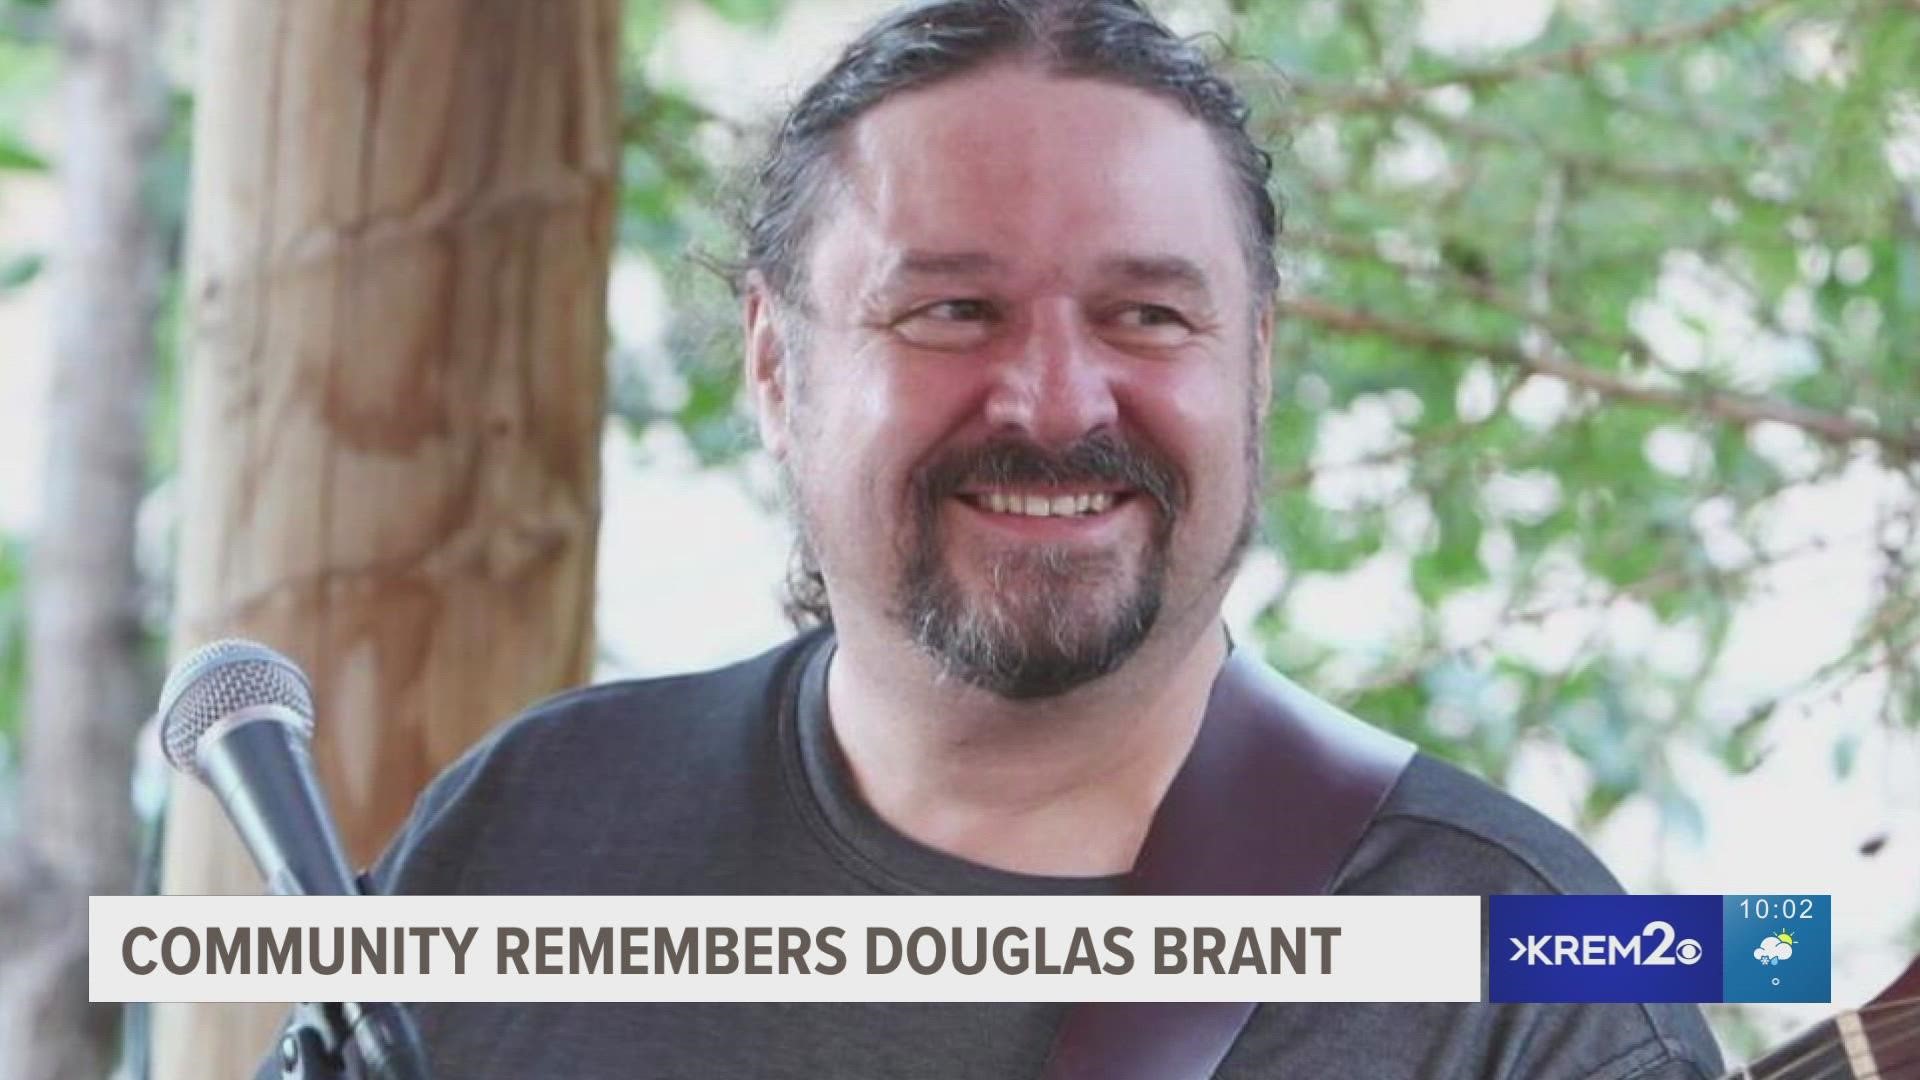 Doug Brant spent nearly 20 years working for Providence before he was shot and killed while taking care of a woman last week.